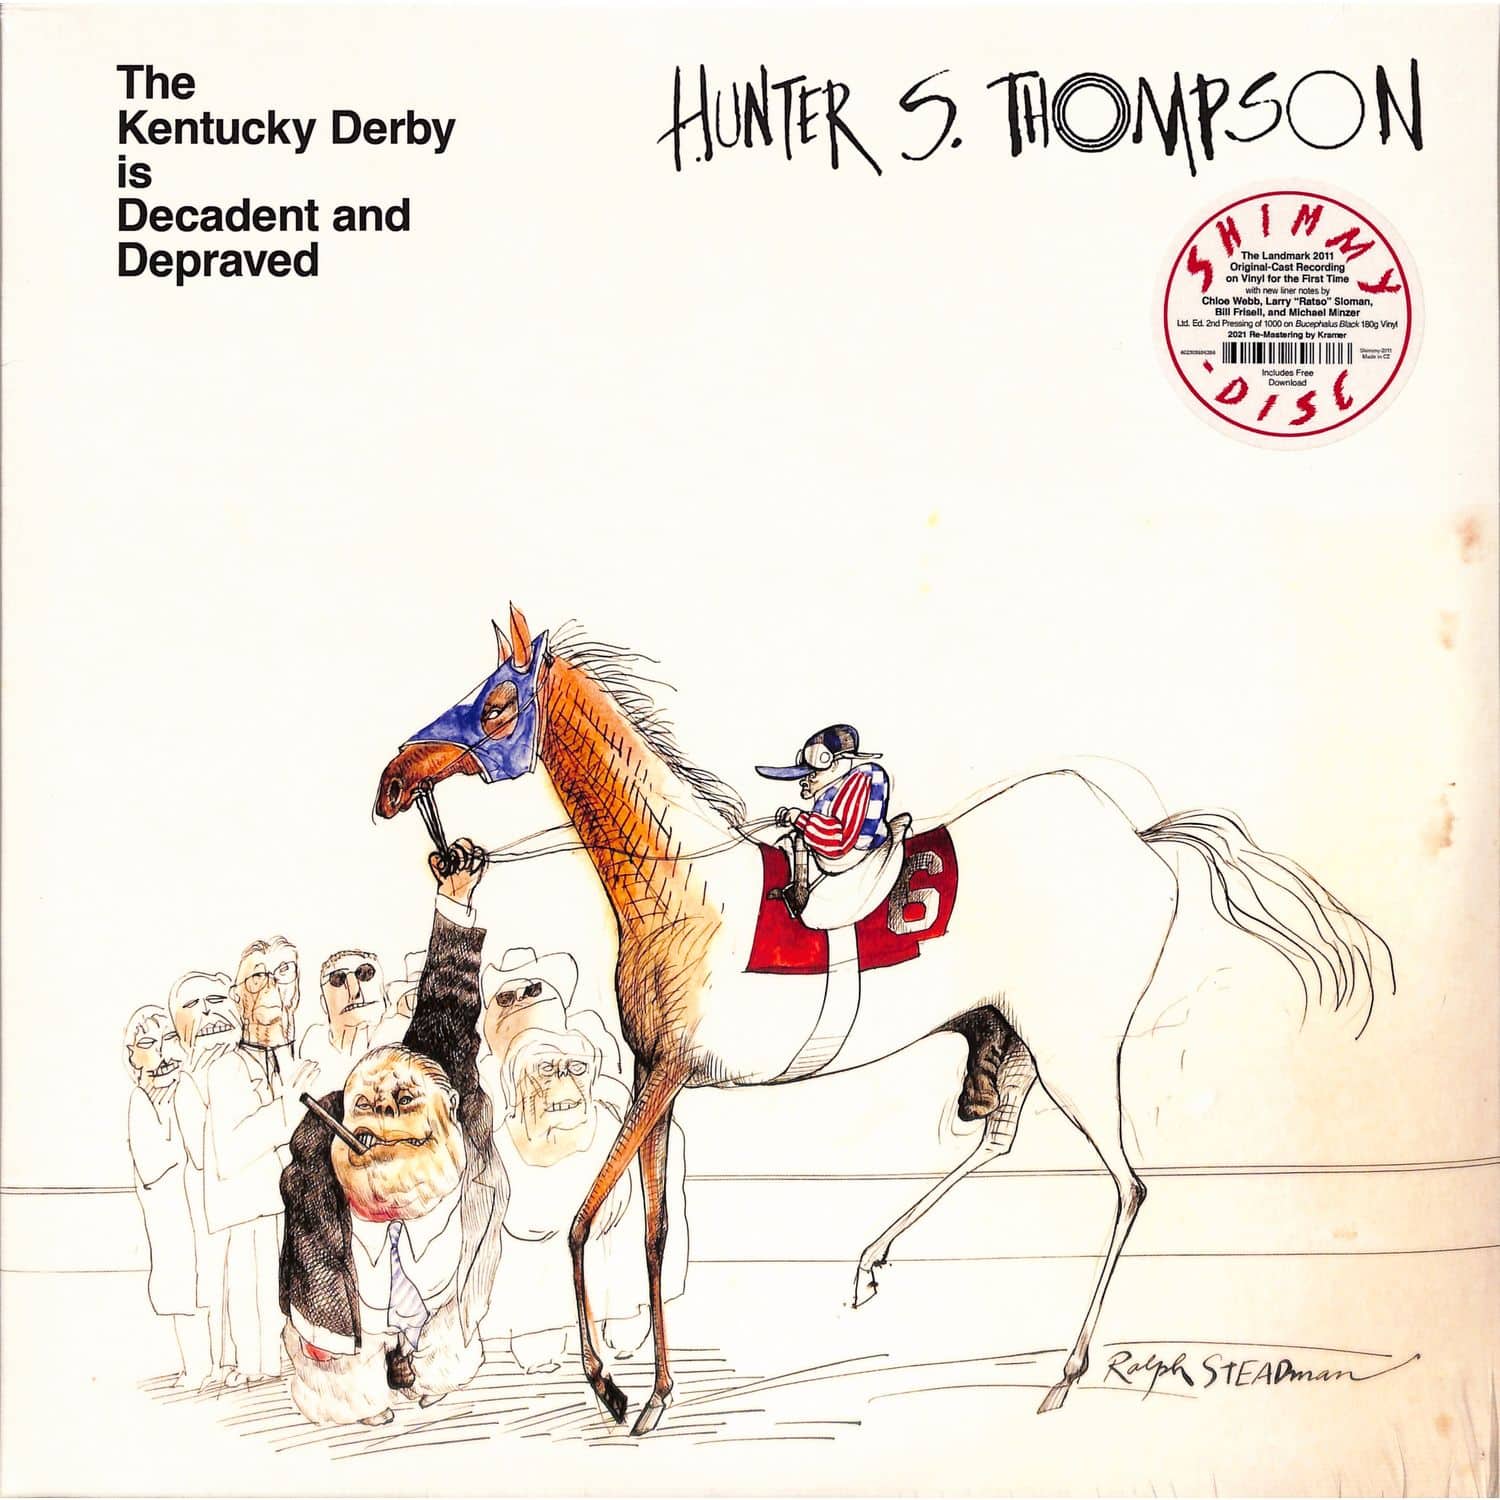 Hunter S. Thompson - THE KENTUCKY DERBY IS DECADENT AND DEPRAVED 